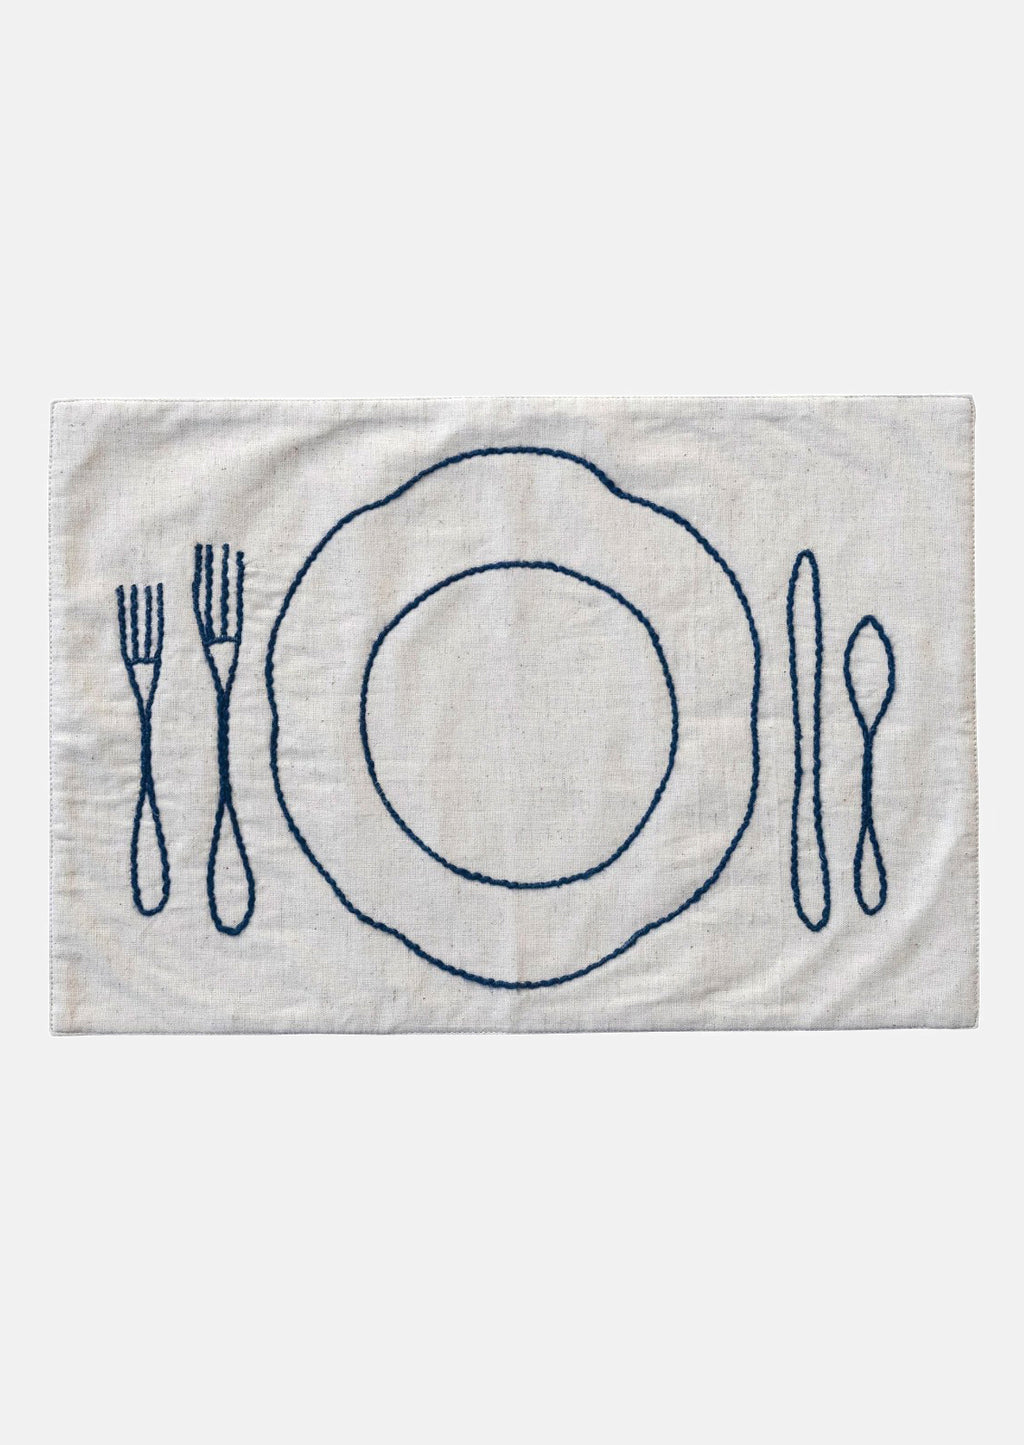 2: An off-white linen-cotton placemat with navy blue plate and silverware embroidery.